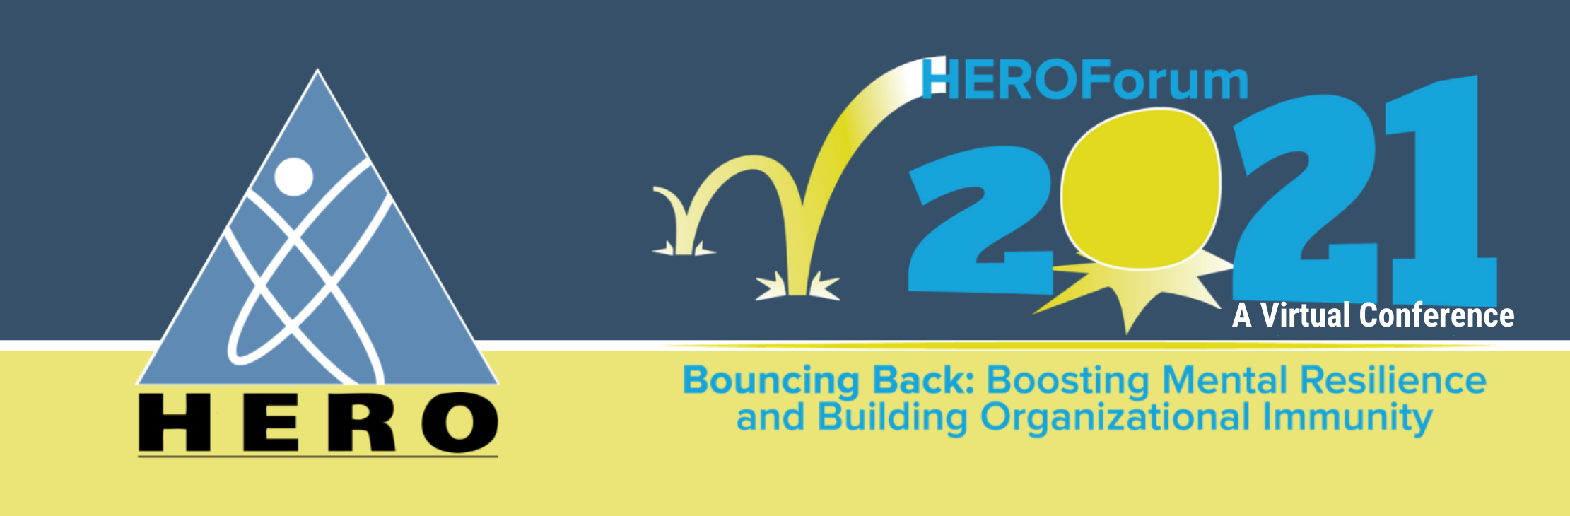 Bouncing Back: How to Boost Resilience and Other Takeaways from HERO Forum21